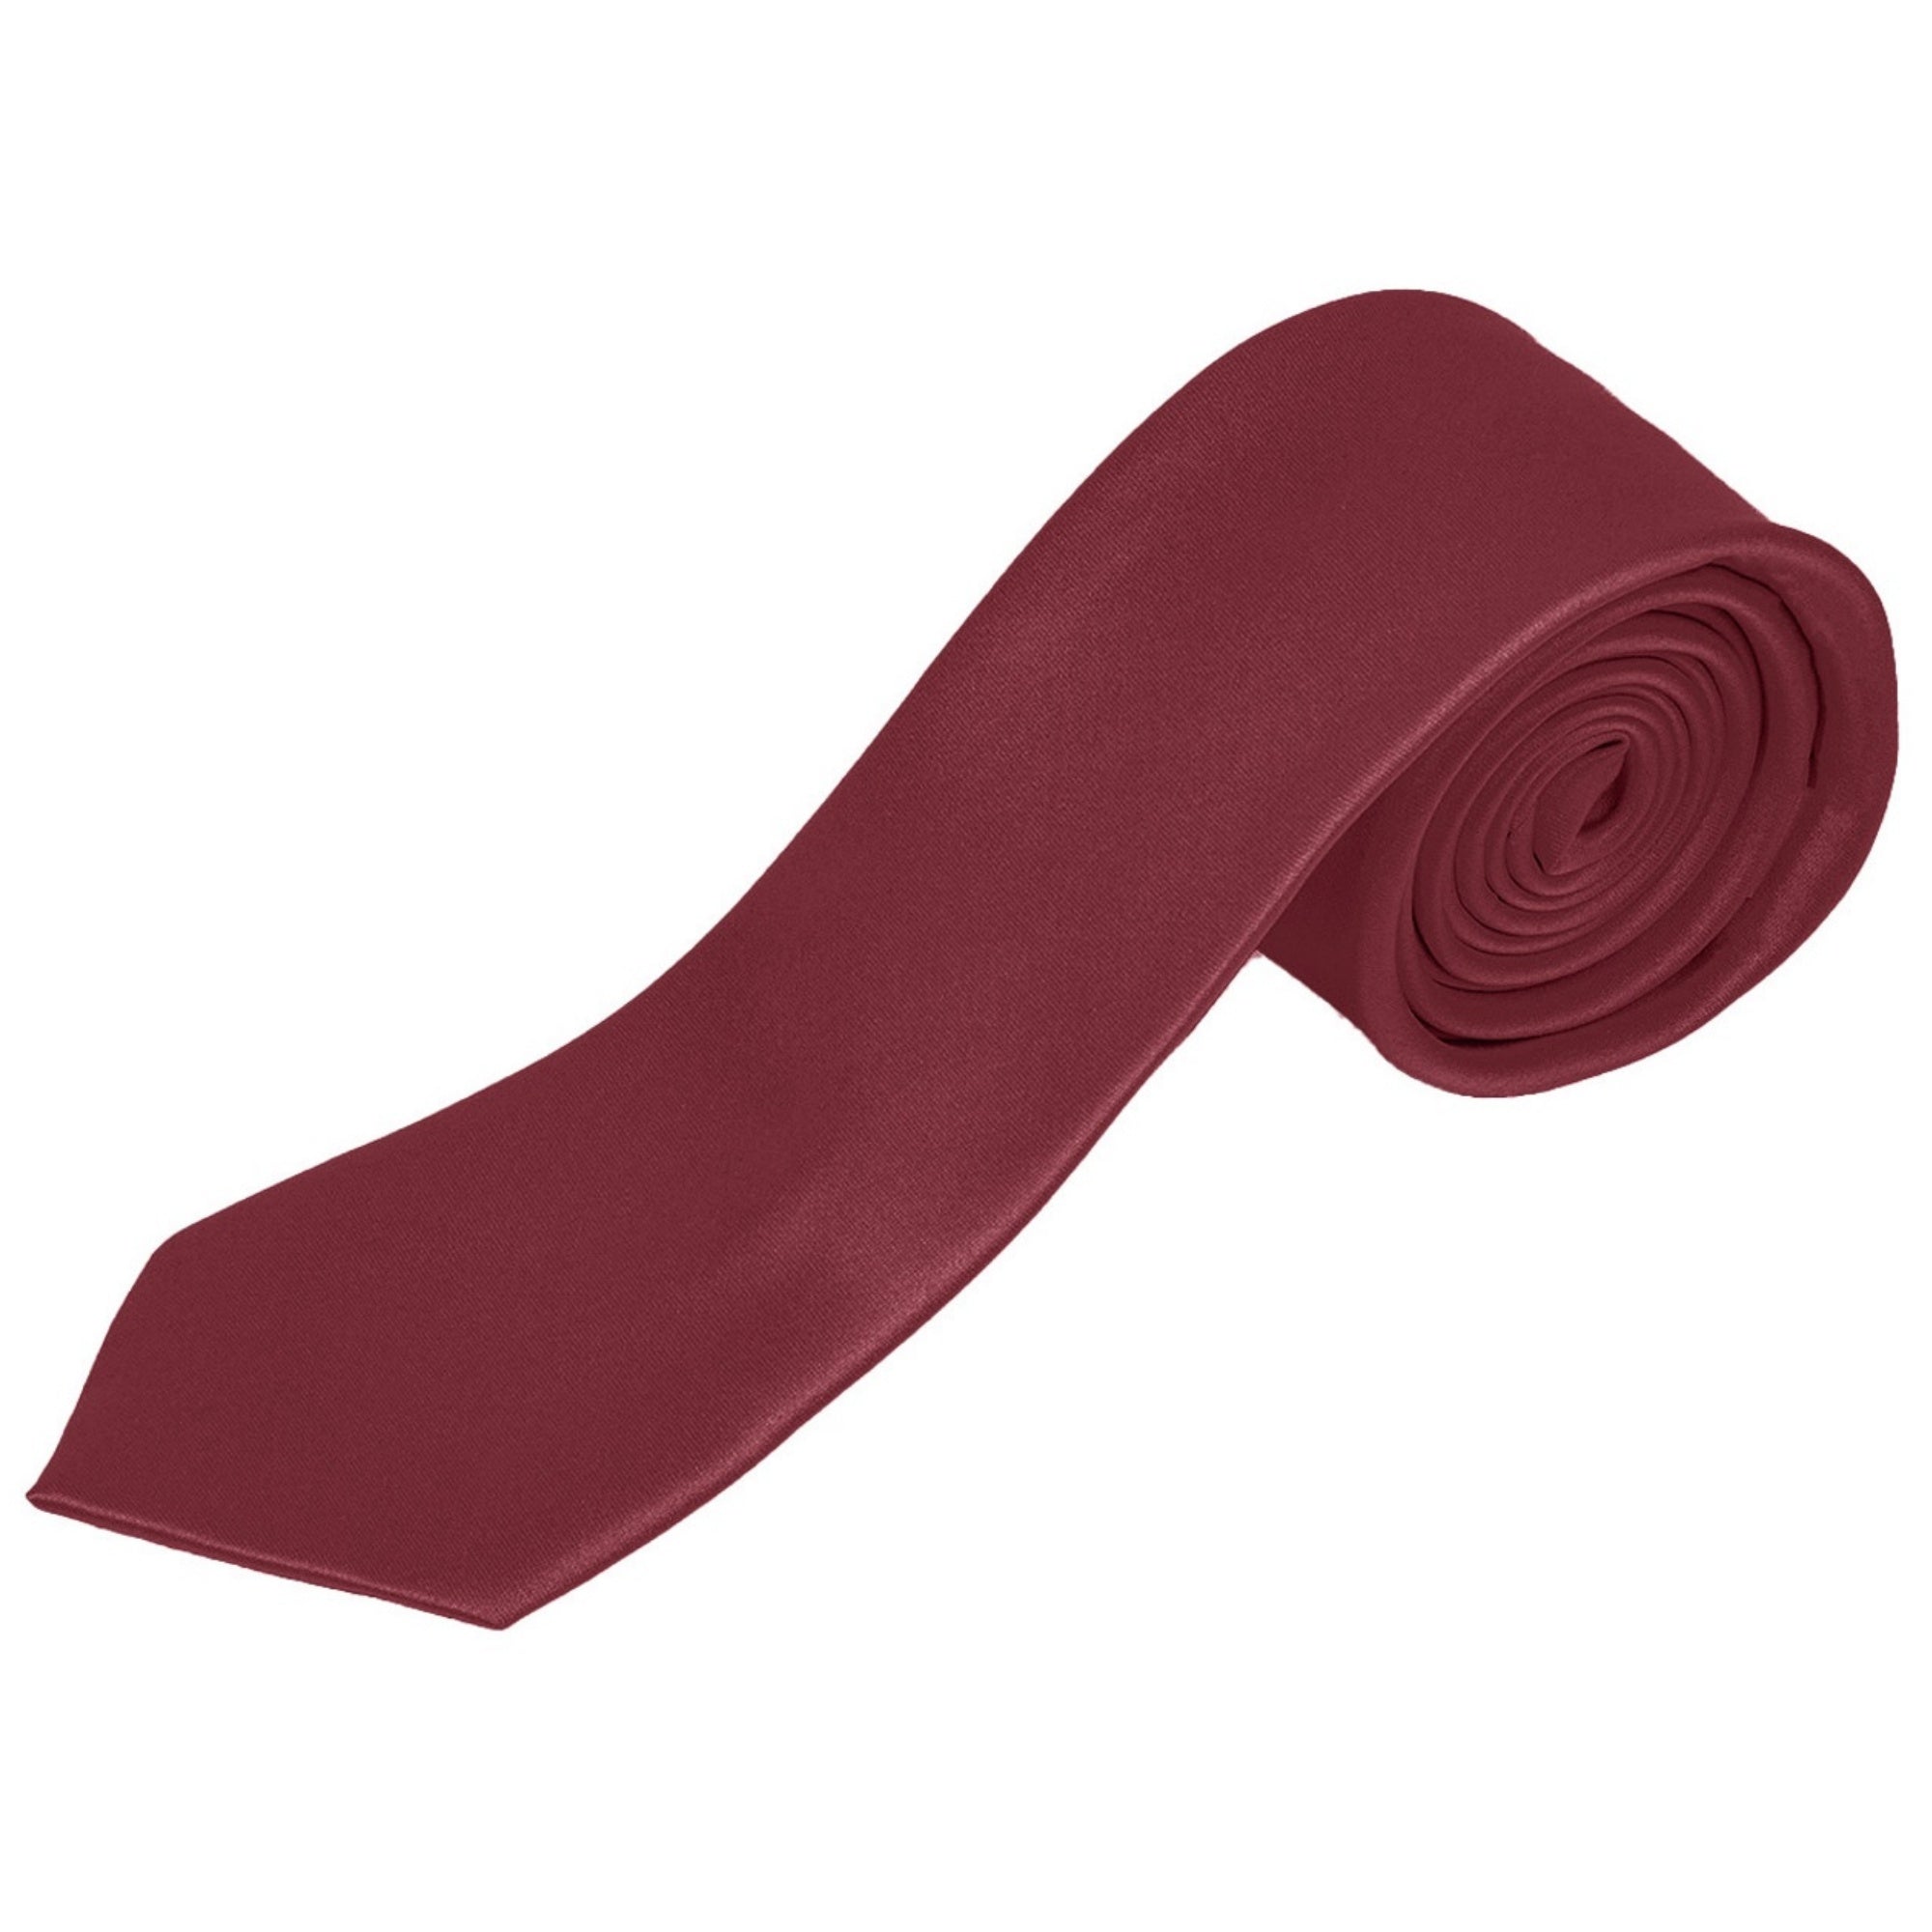 Men's Solid Color 2 Inch Wide And 57 Inch Long Slim Neckties Neck Tie TheDapperTie Burgundy 57" long and 2" wide 